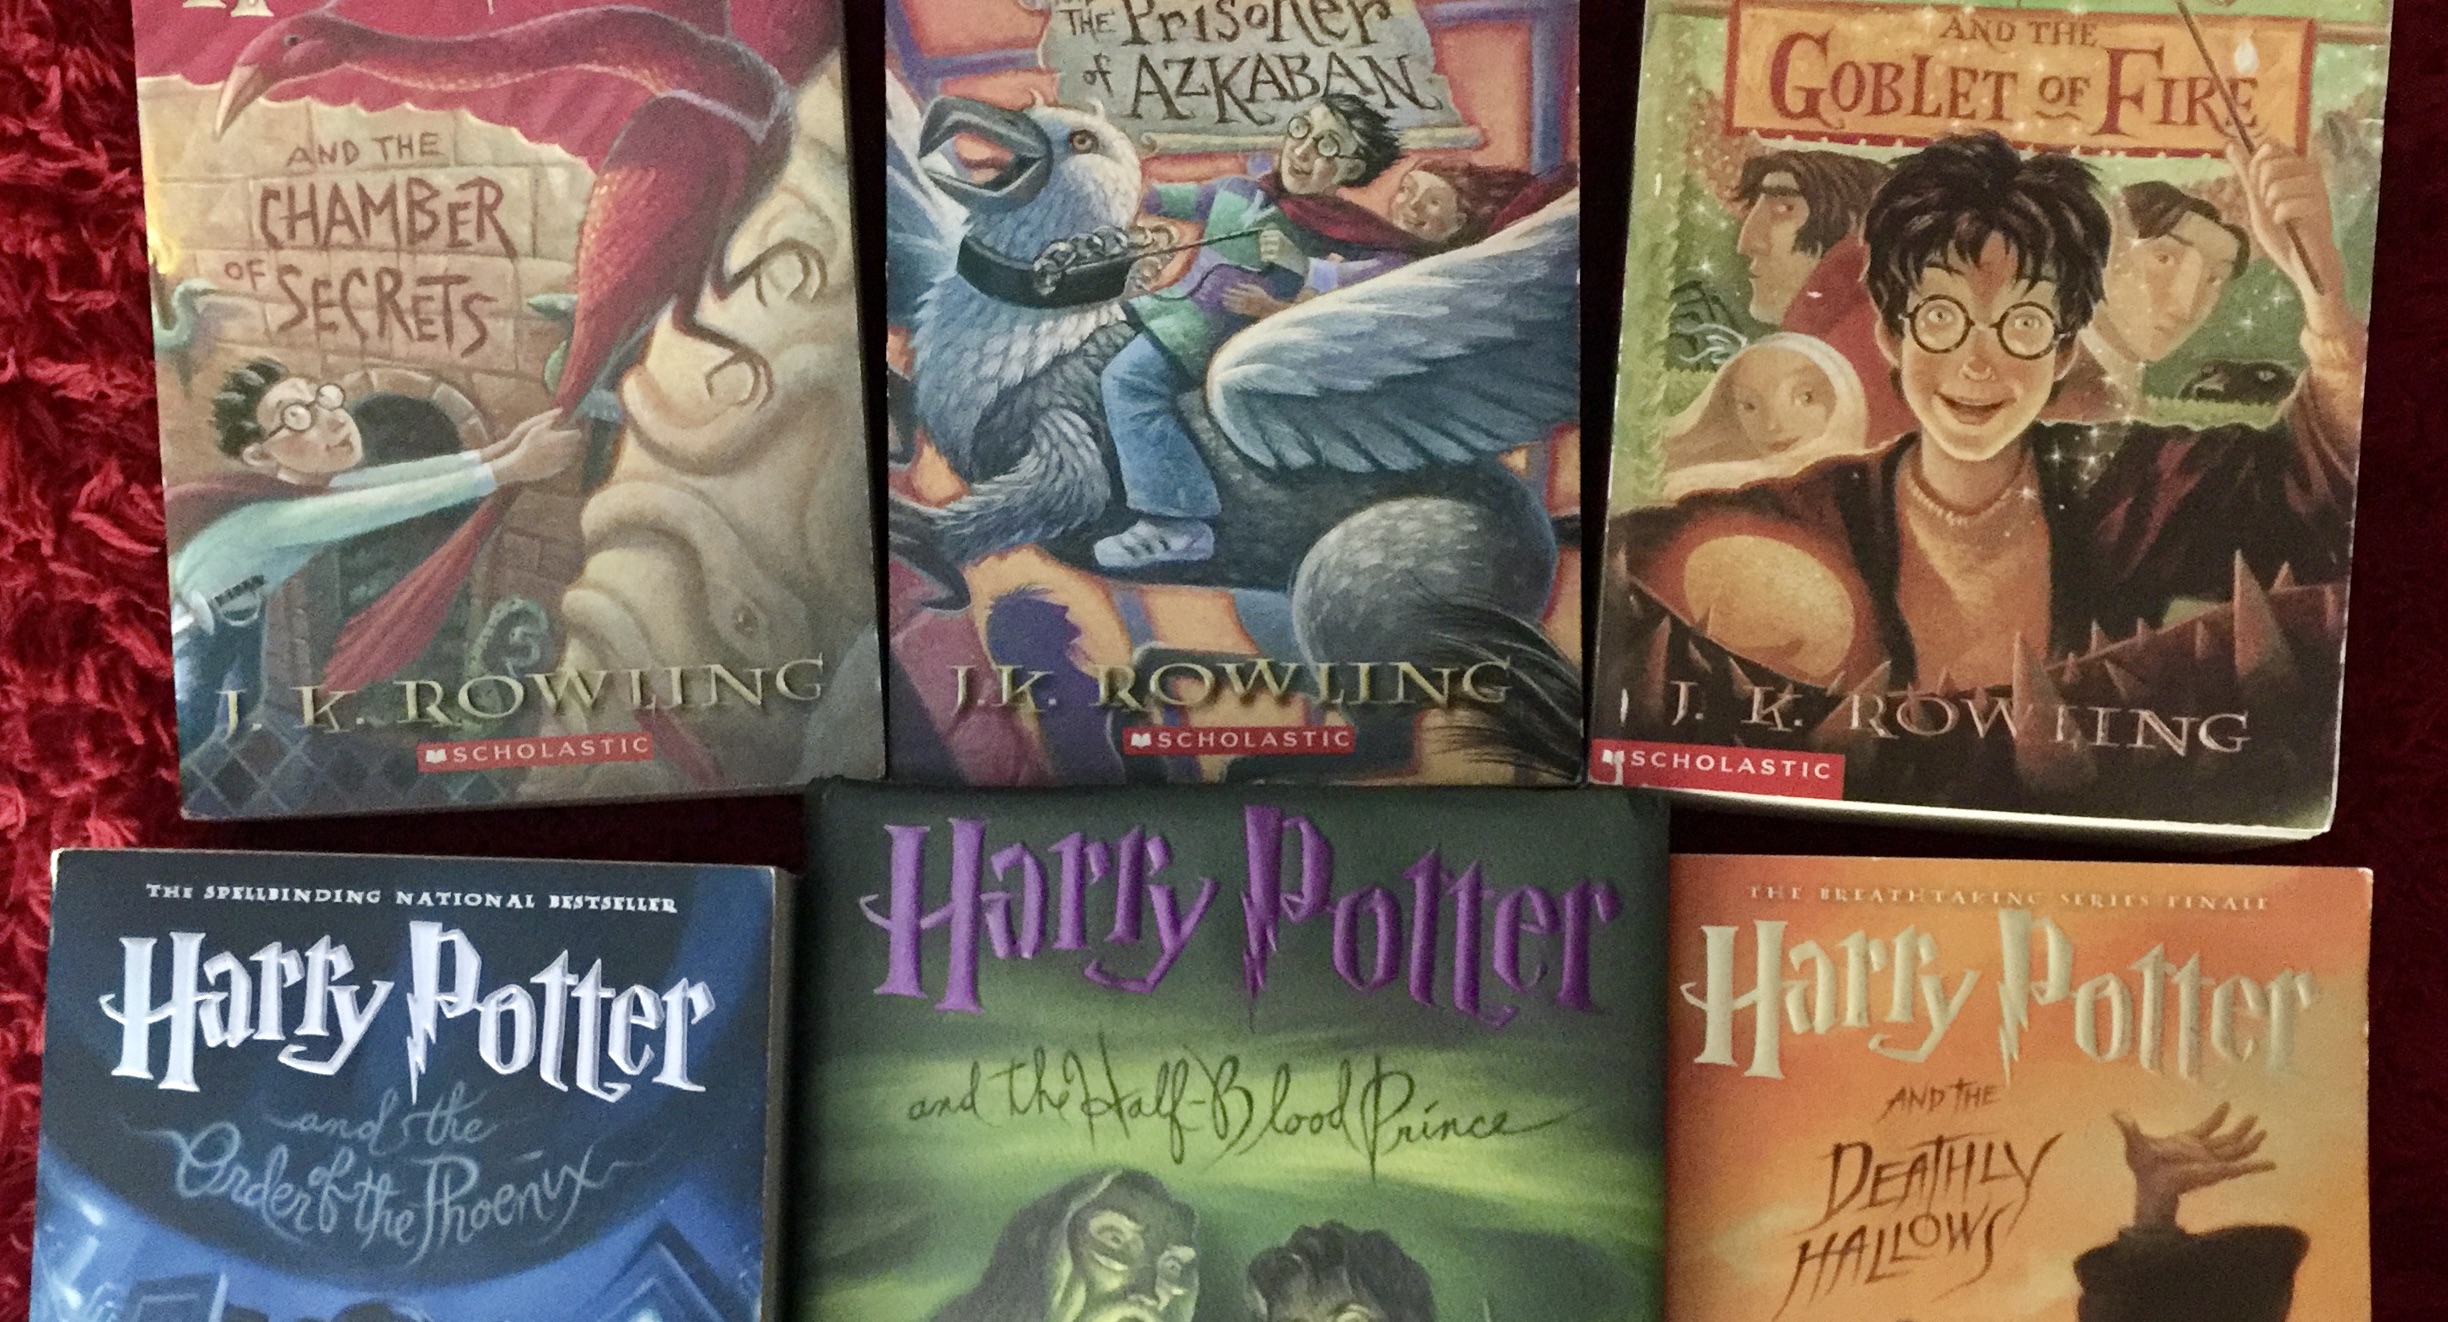 Which Harry Potter books should I buy - Scholastic or Bloomsbury? - Quora